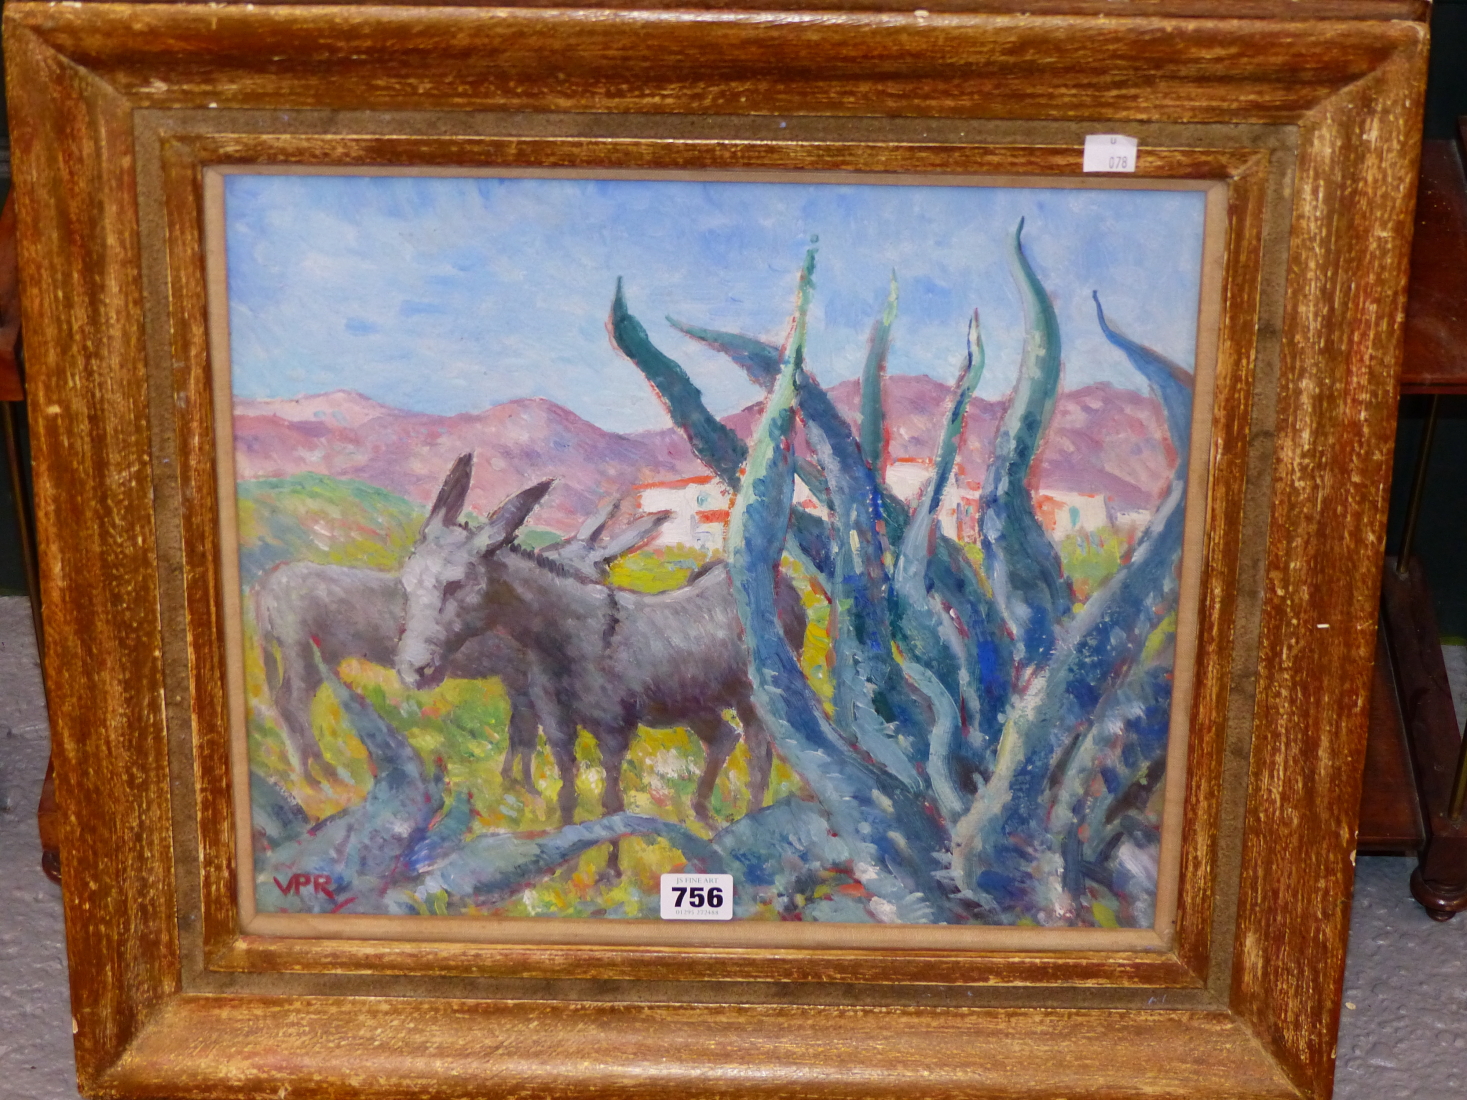 LADY PATRICIA RAMSAY (1886-1974), ARR, DONKEYS IN AN ANDALUSIAN SCENE, OIL ON PANEL, INITIALLED - Image 2 of 5